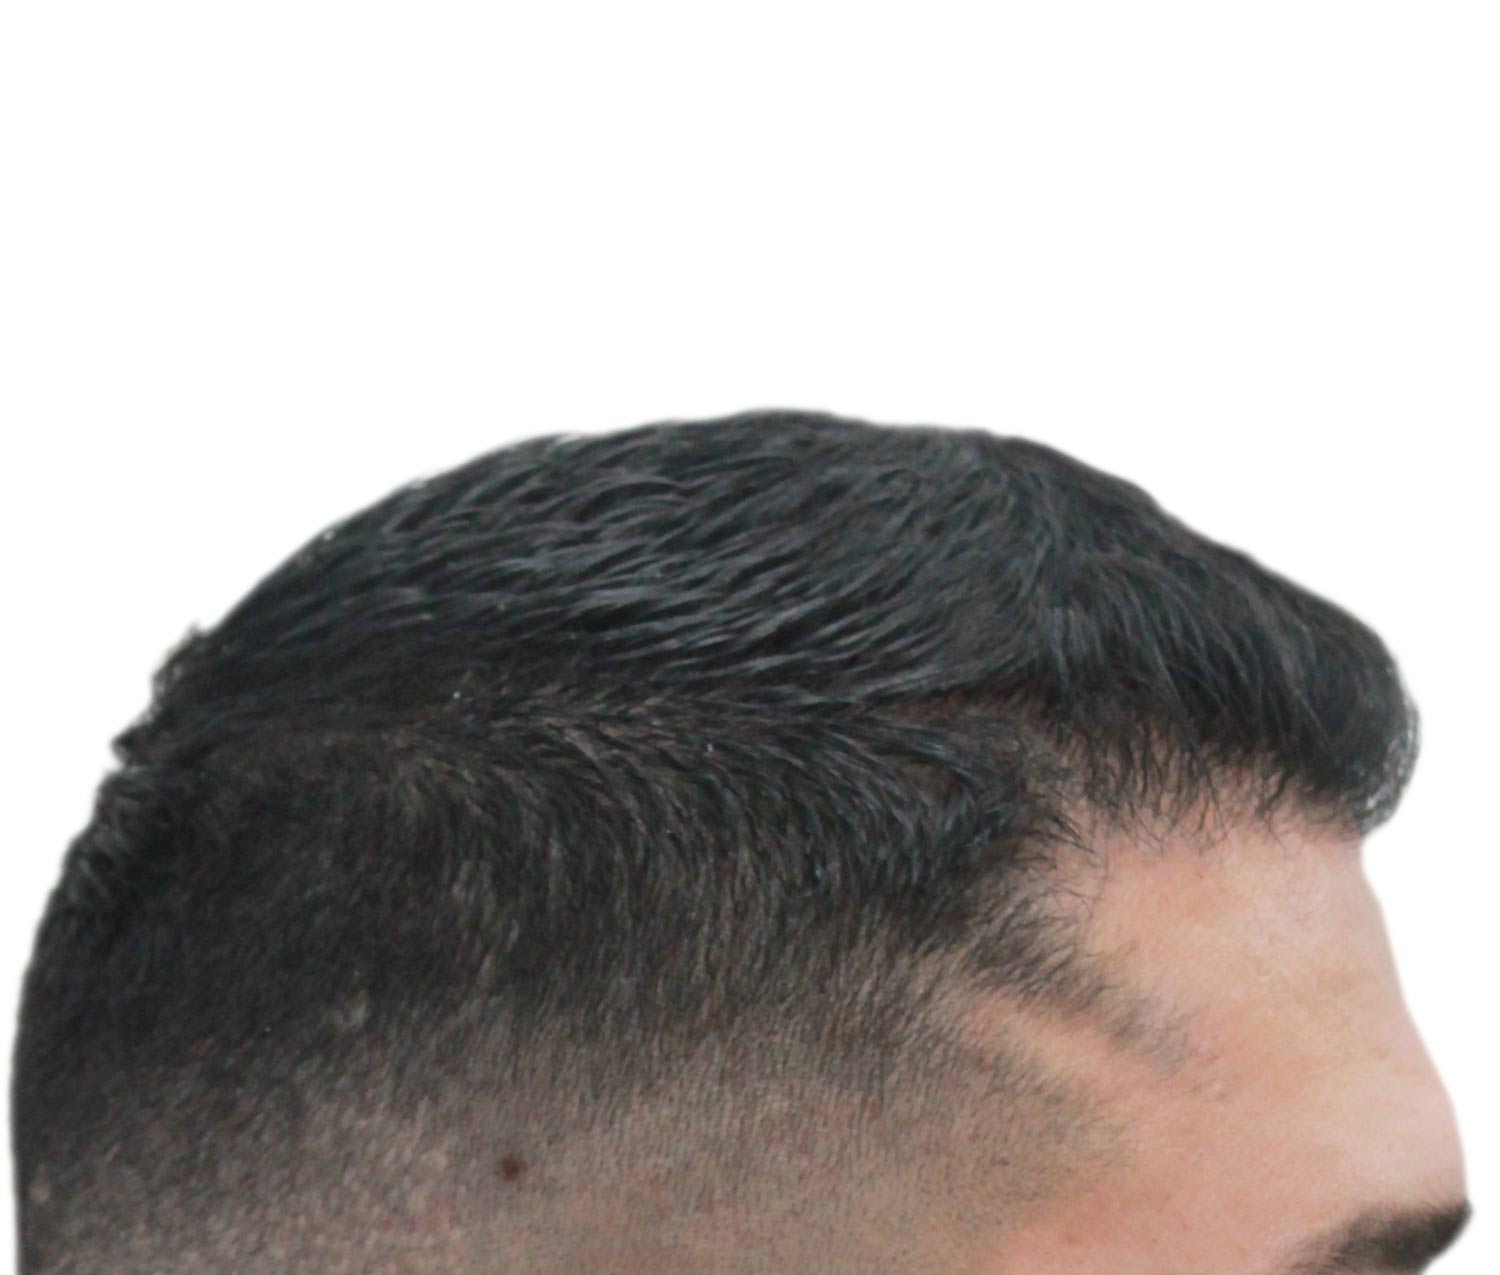 a close up of a man 's head with a shaved head .